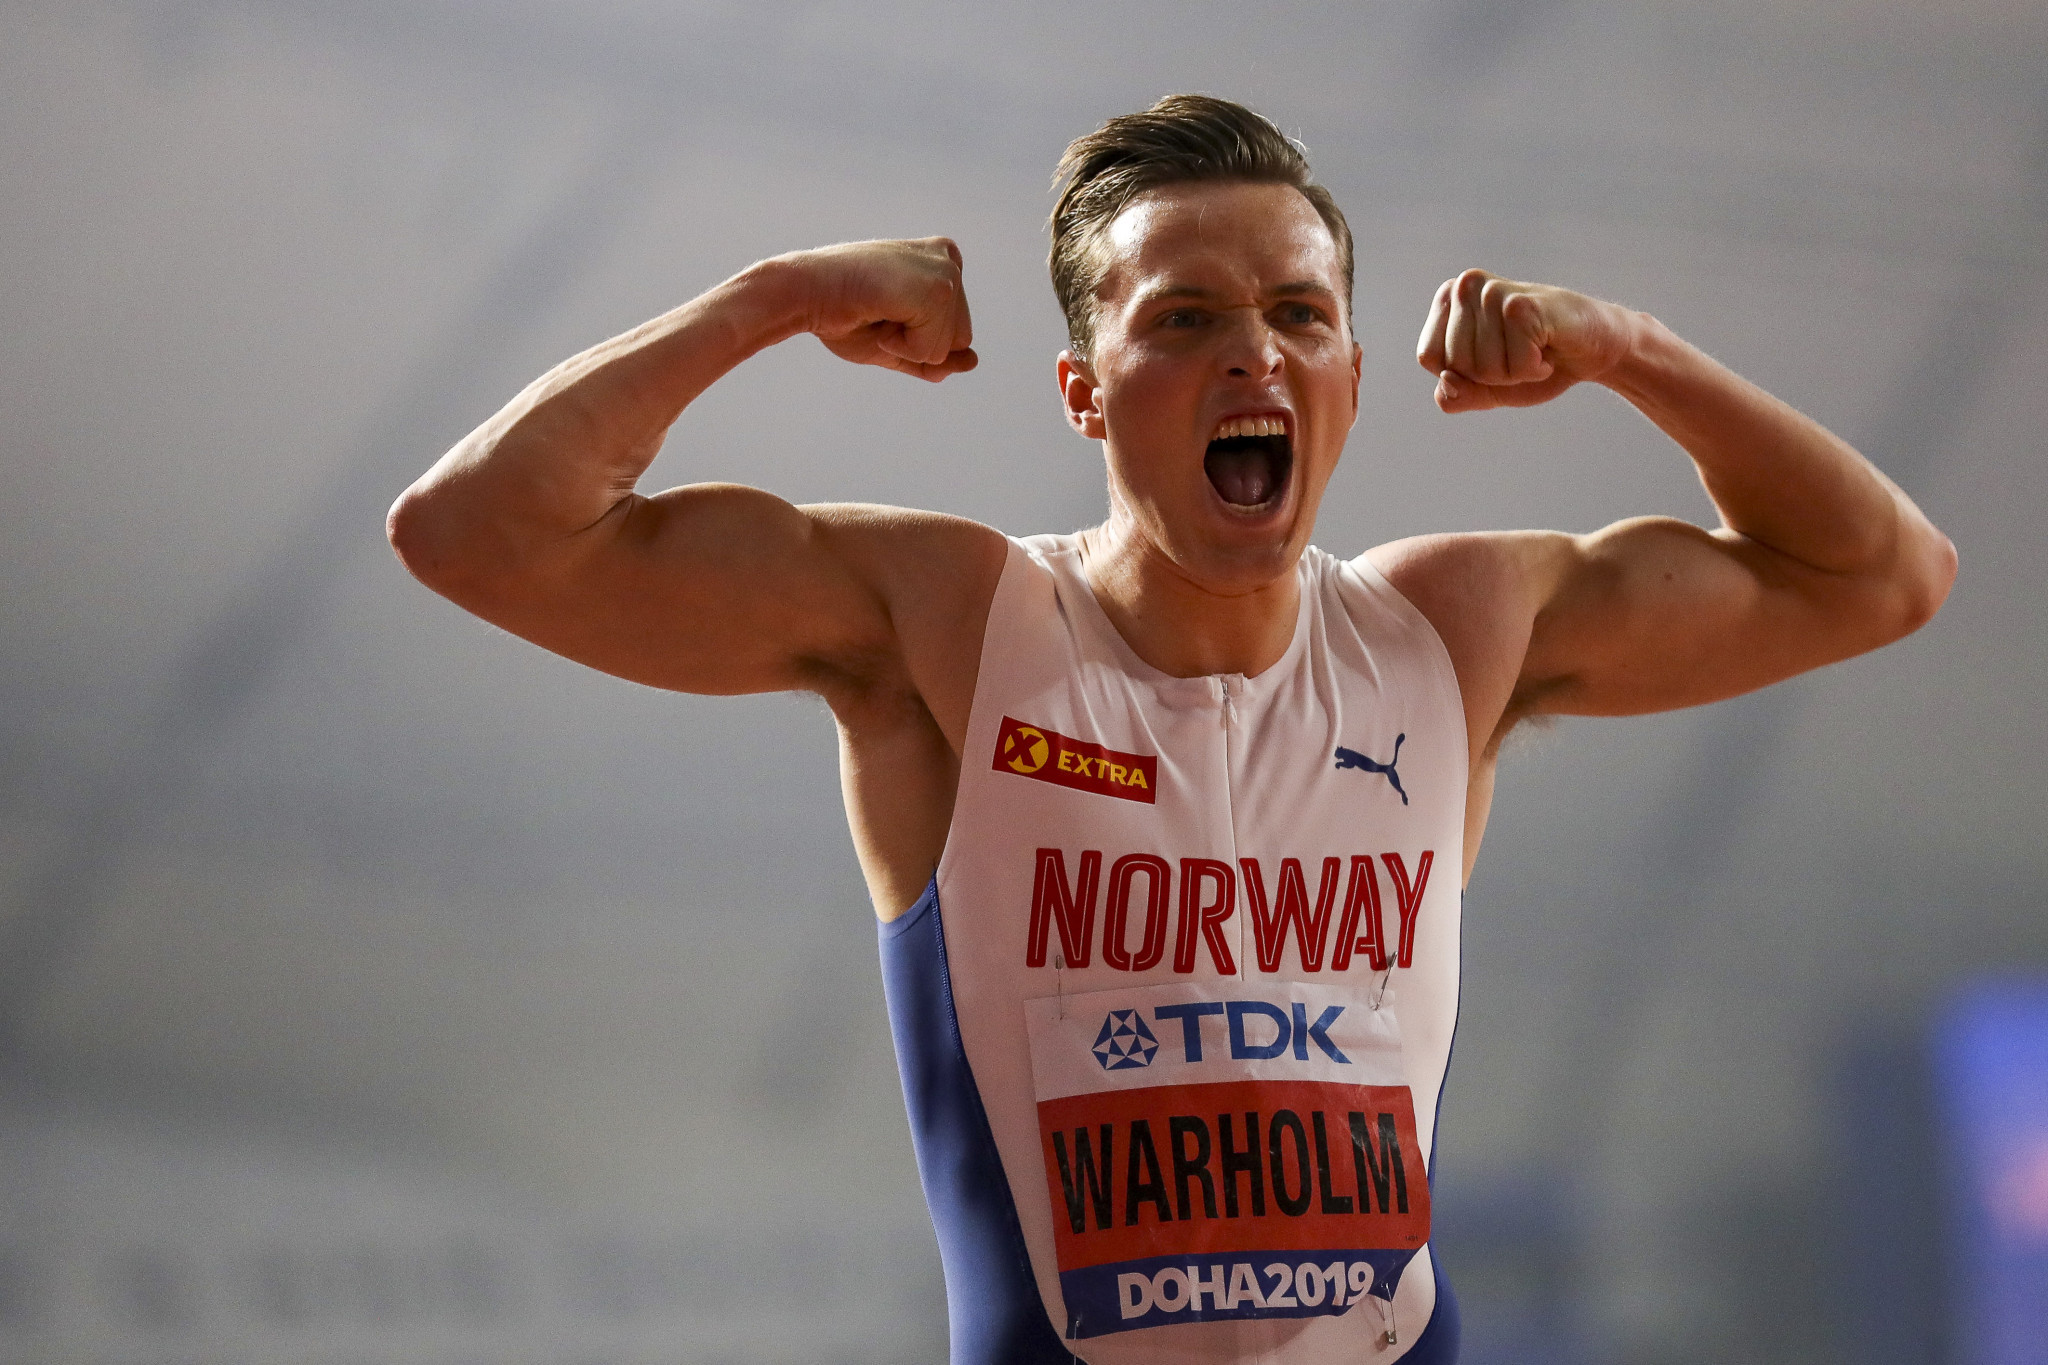 Duplantis and Warholm gear up for another tilt at world marks in Rome